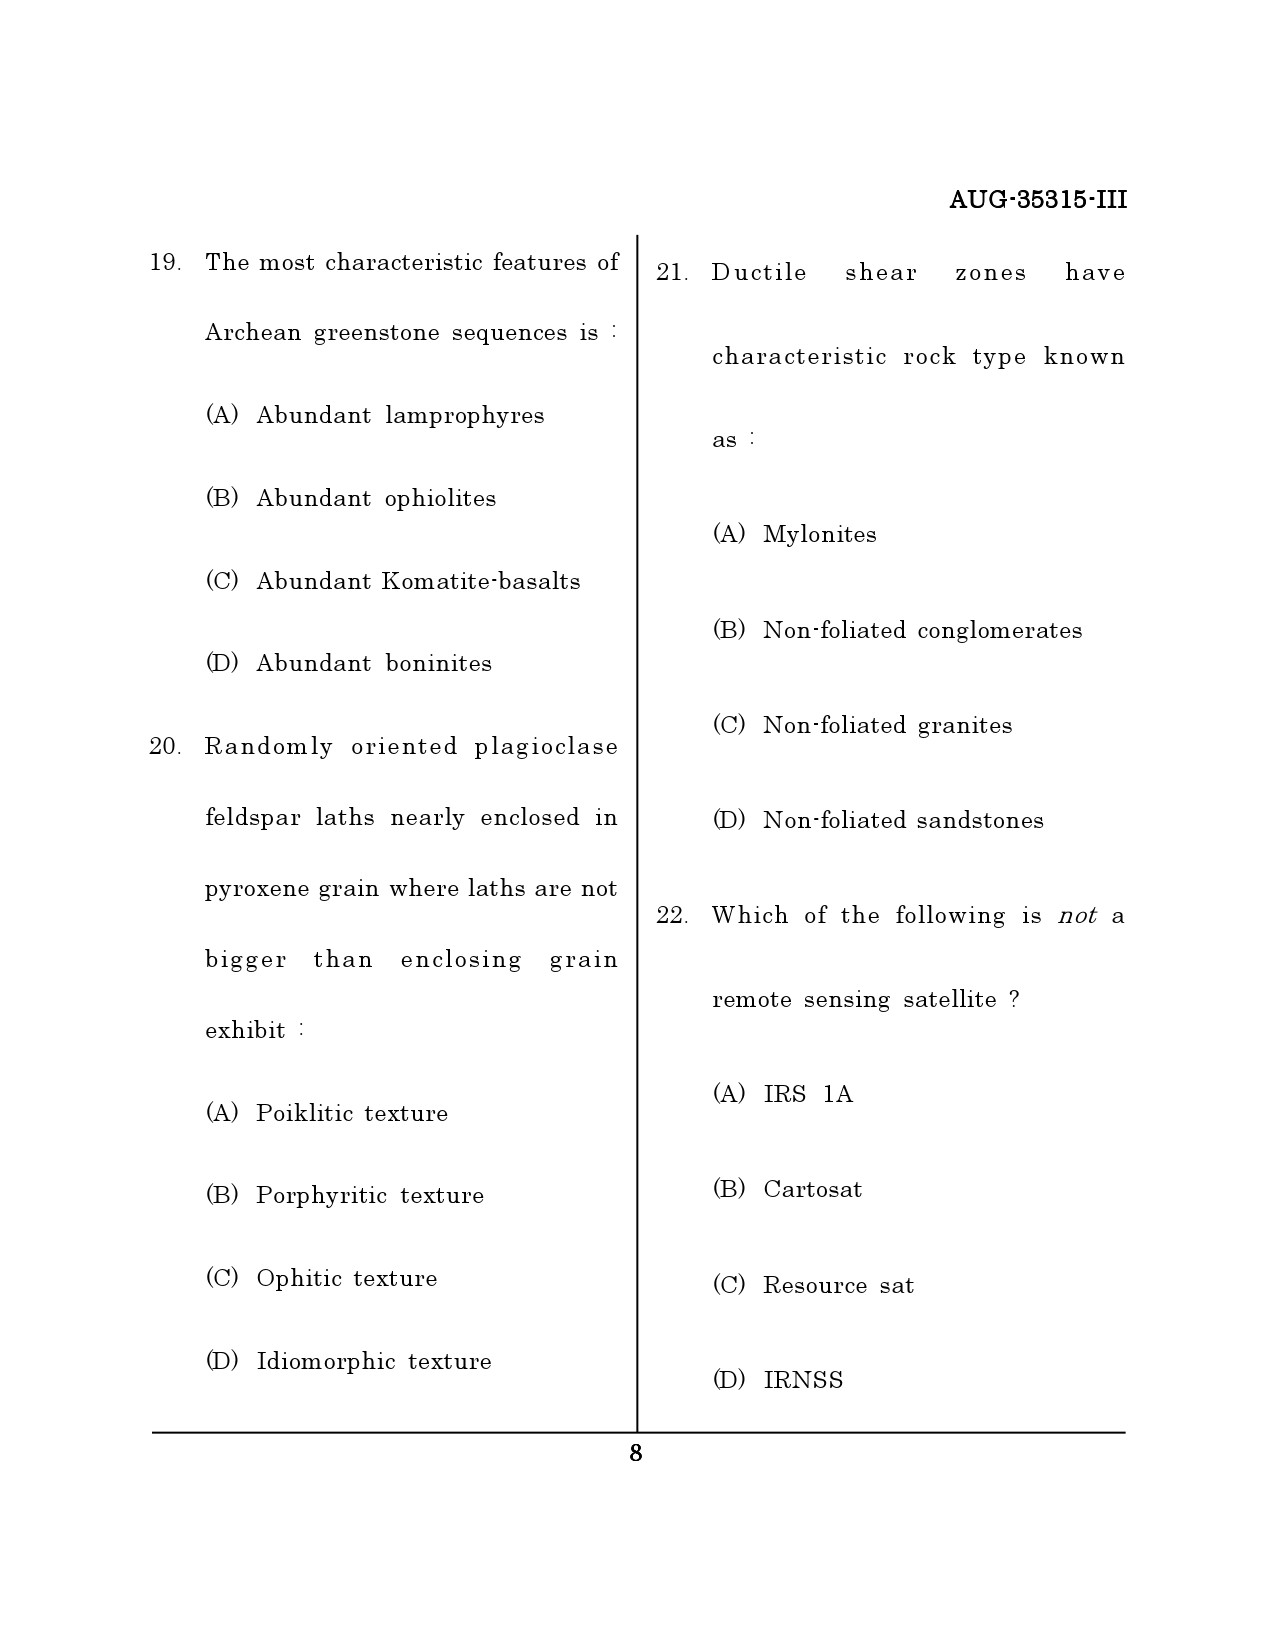 Maharashtra SET Earth Atmospheric Ocean Planetary Science Question Paper III August 2015 7